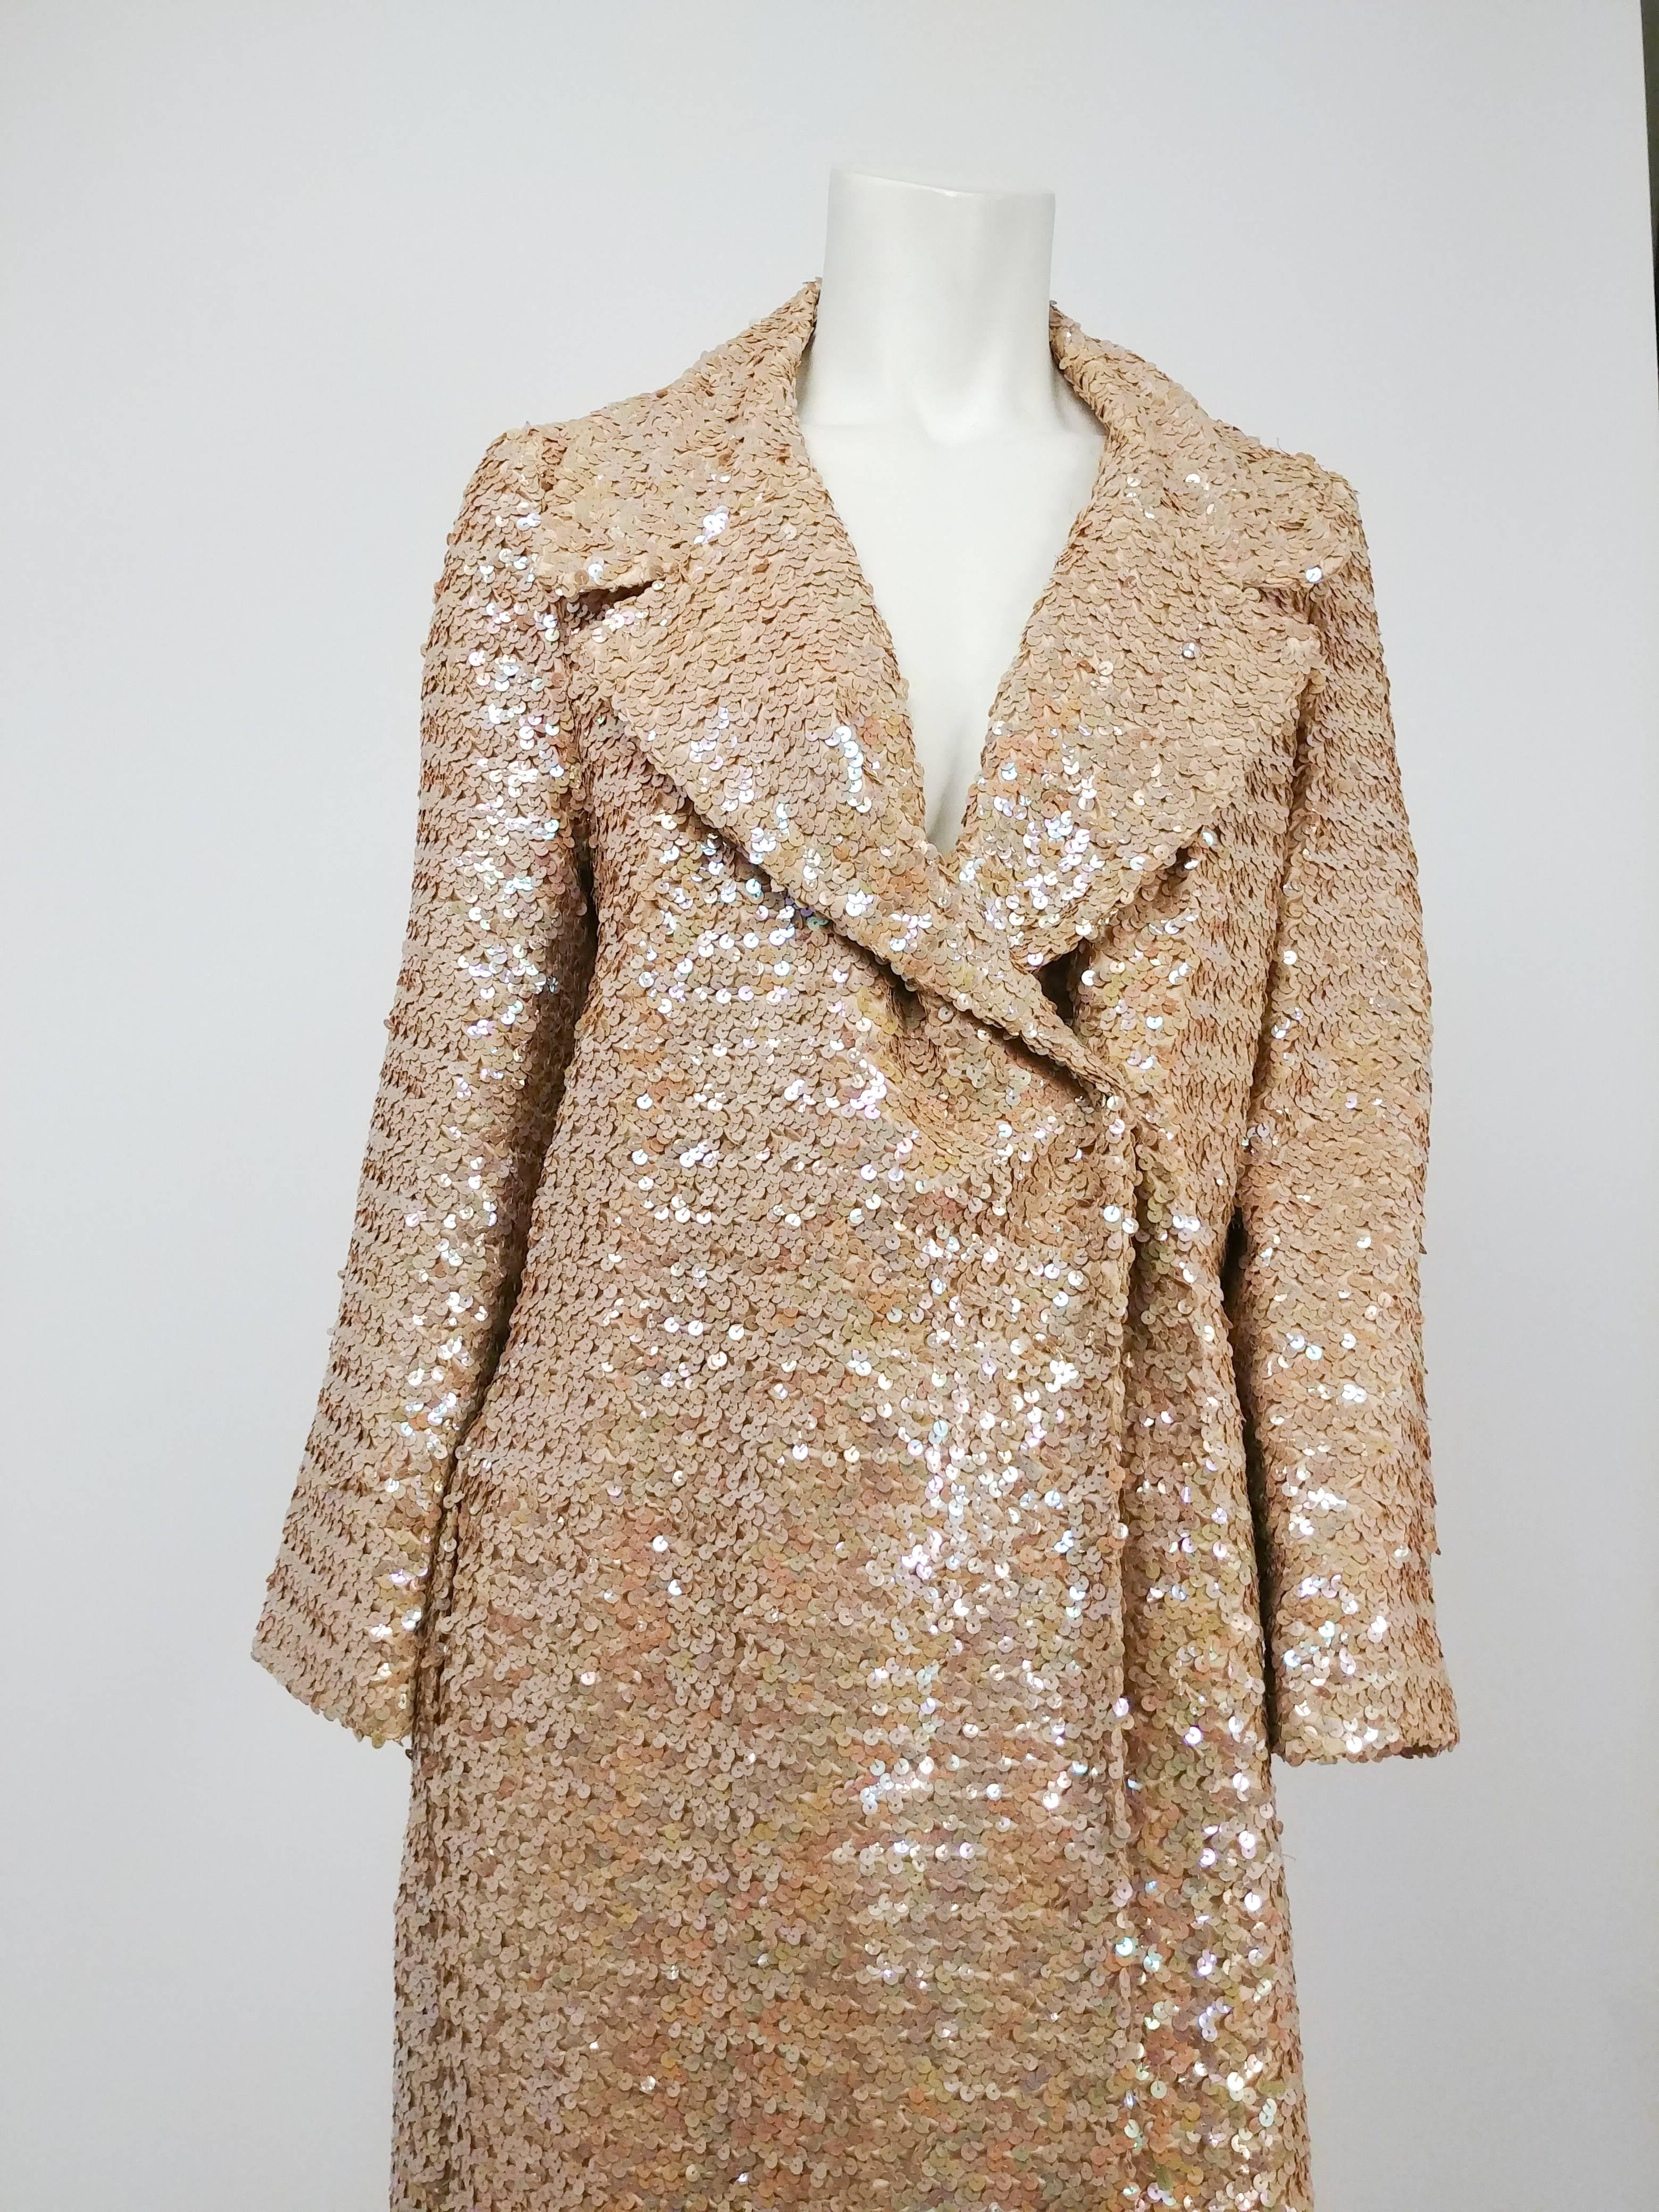 1970s Iridescent Sequin Full Length Long Coat. Hidden snap closure. Wide lapels. A stunning showstopper that will make you never want to take your coat off! 

We have tried this coat on a few of our models who range from size 6 to 12 and due to the